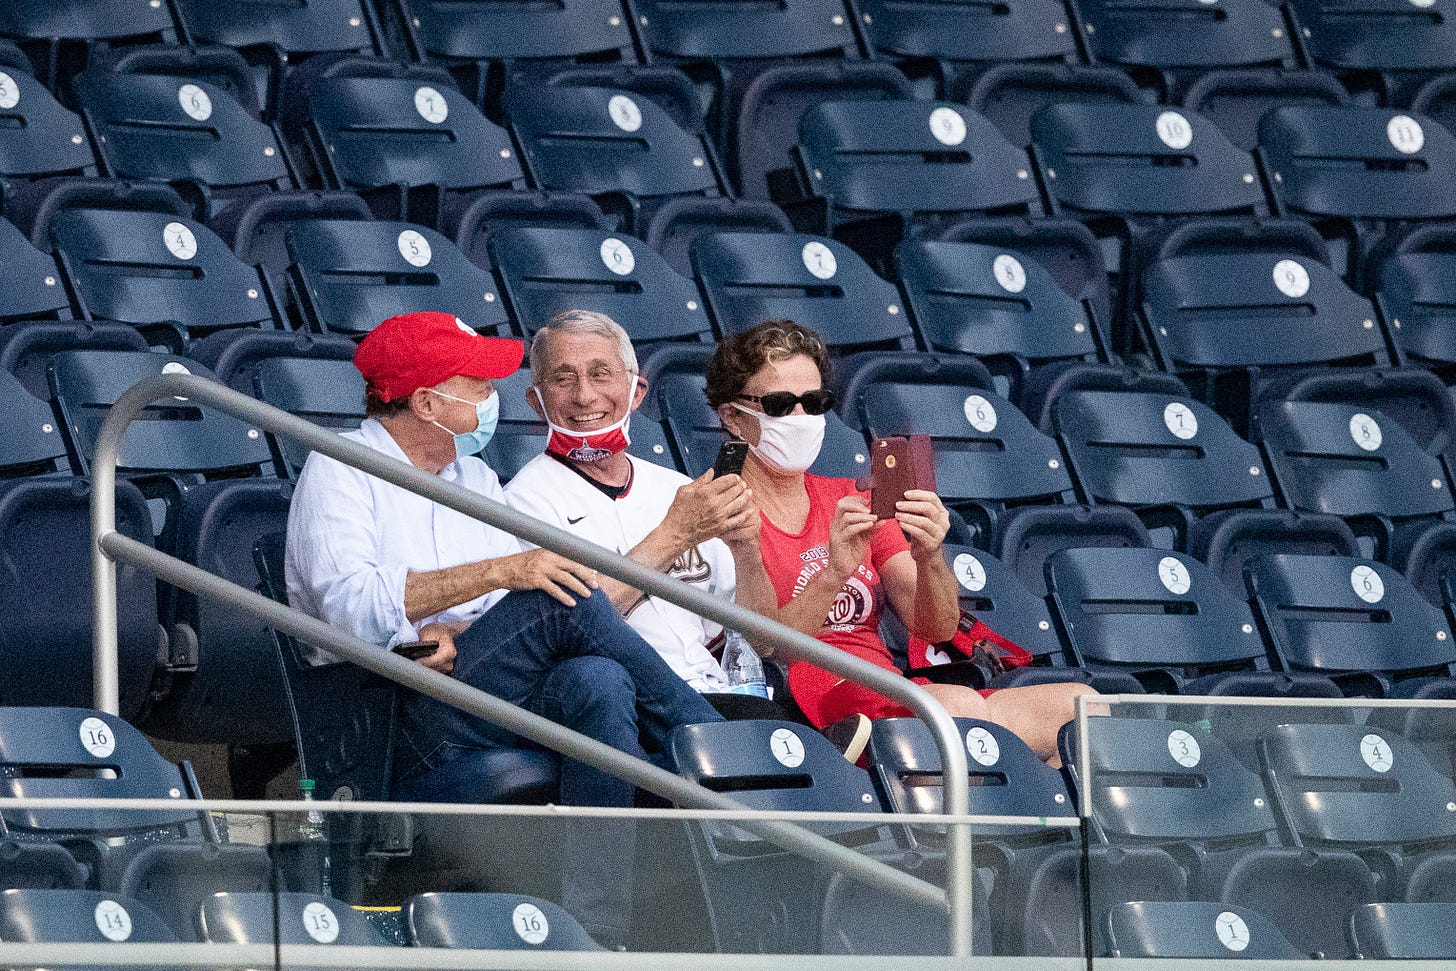 Dr. Anthony Fauci says photo of him without a mask at baseball game is  'mischievous' - Washington Times